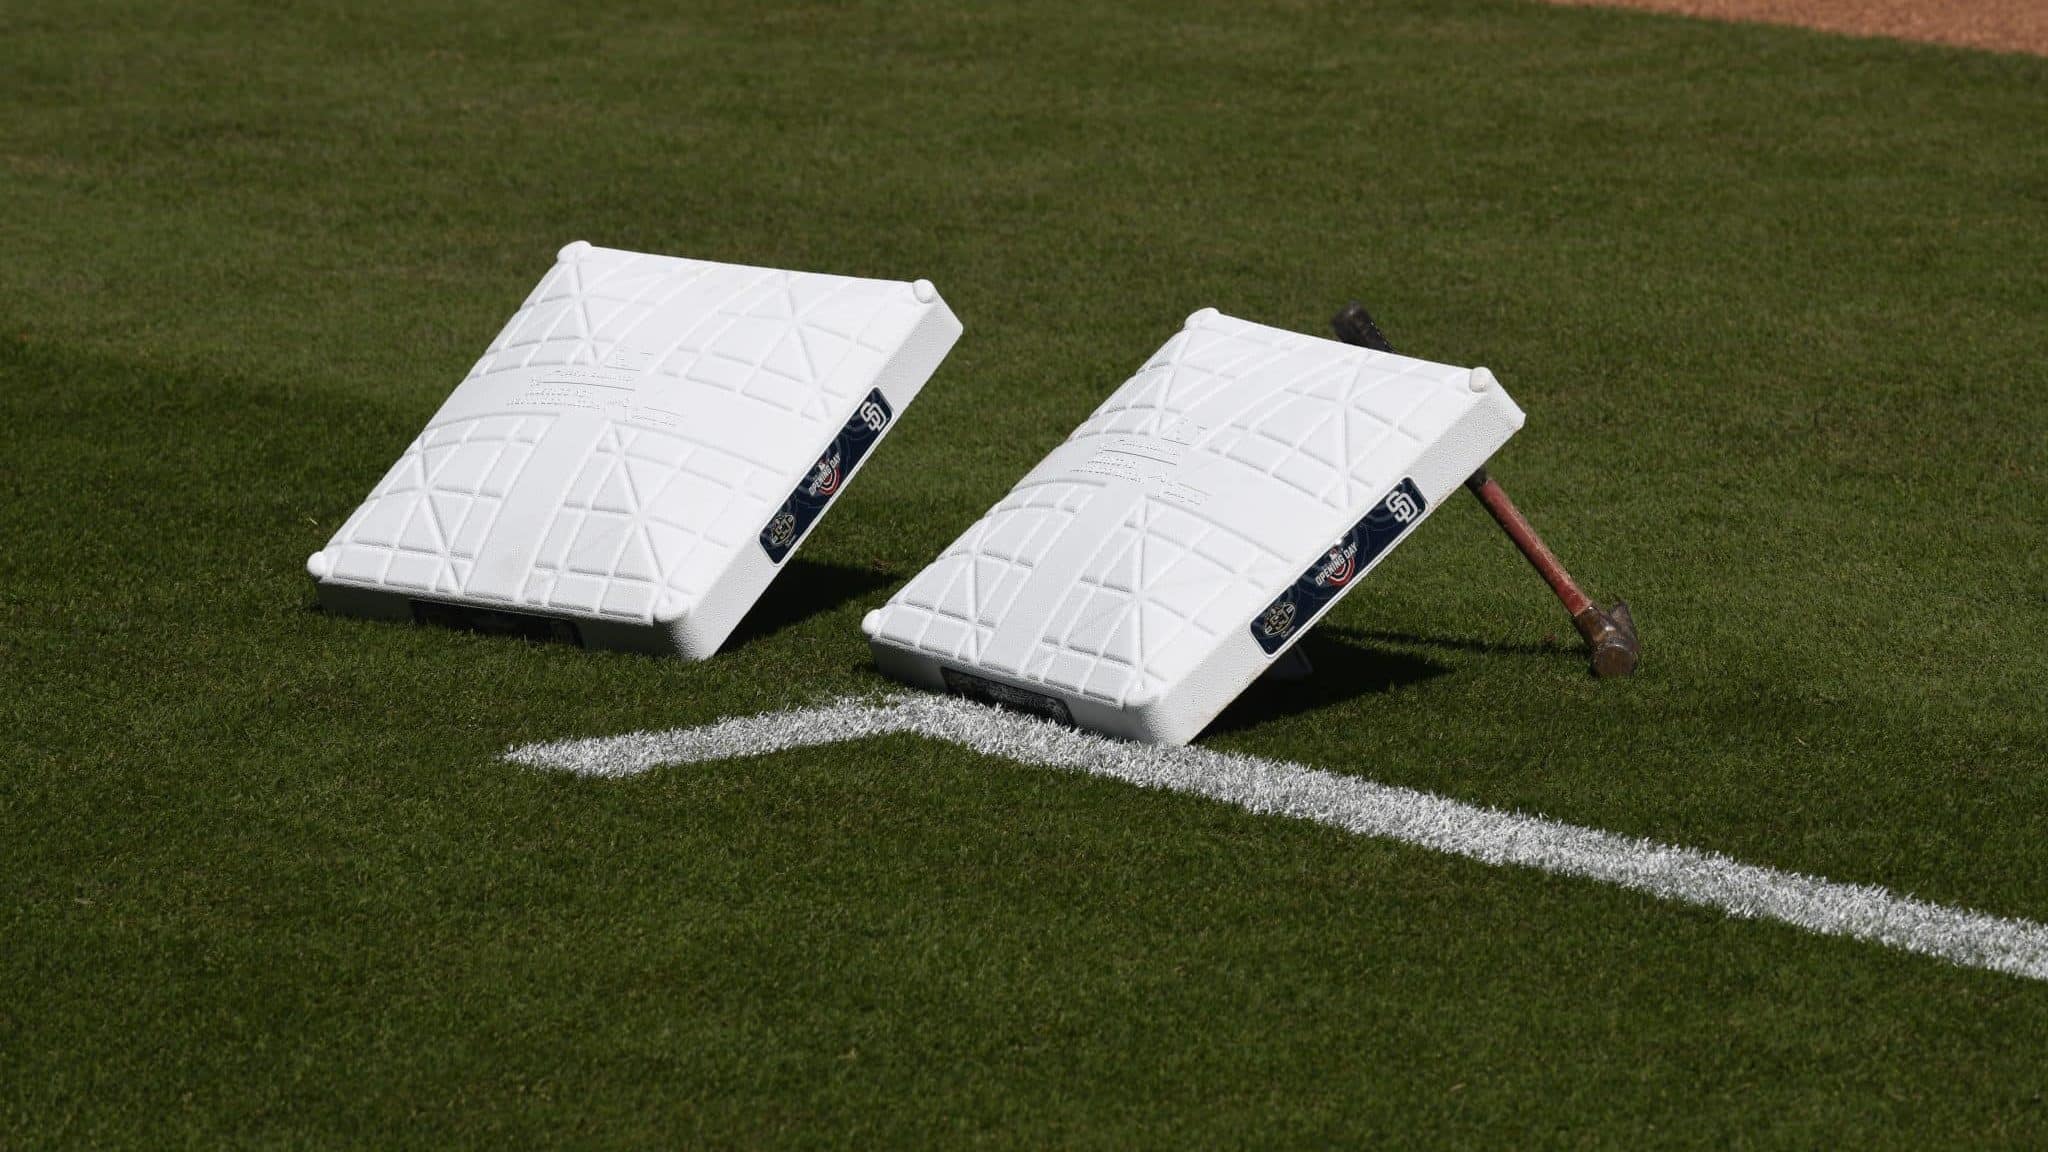 SAN DIEGO, CA - MARCH 28: Bases with the Opening Day logo sit on the field before the game between the San Diego Padres and the San Francisco Giants on Opening Day at Petco Park March 28, 2019 in San Diego, California.